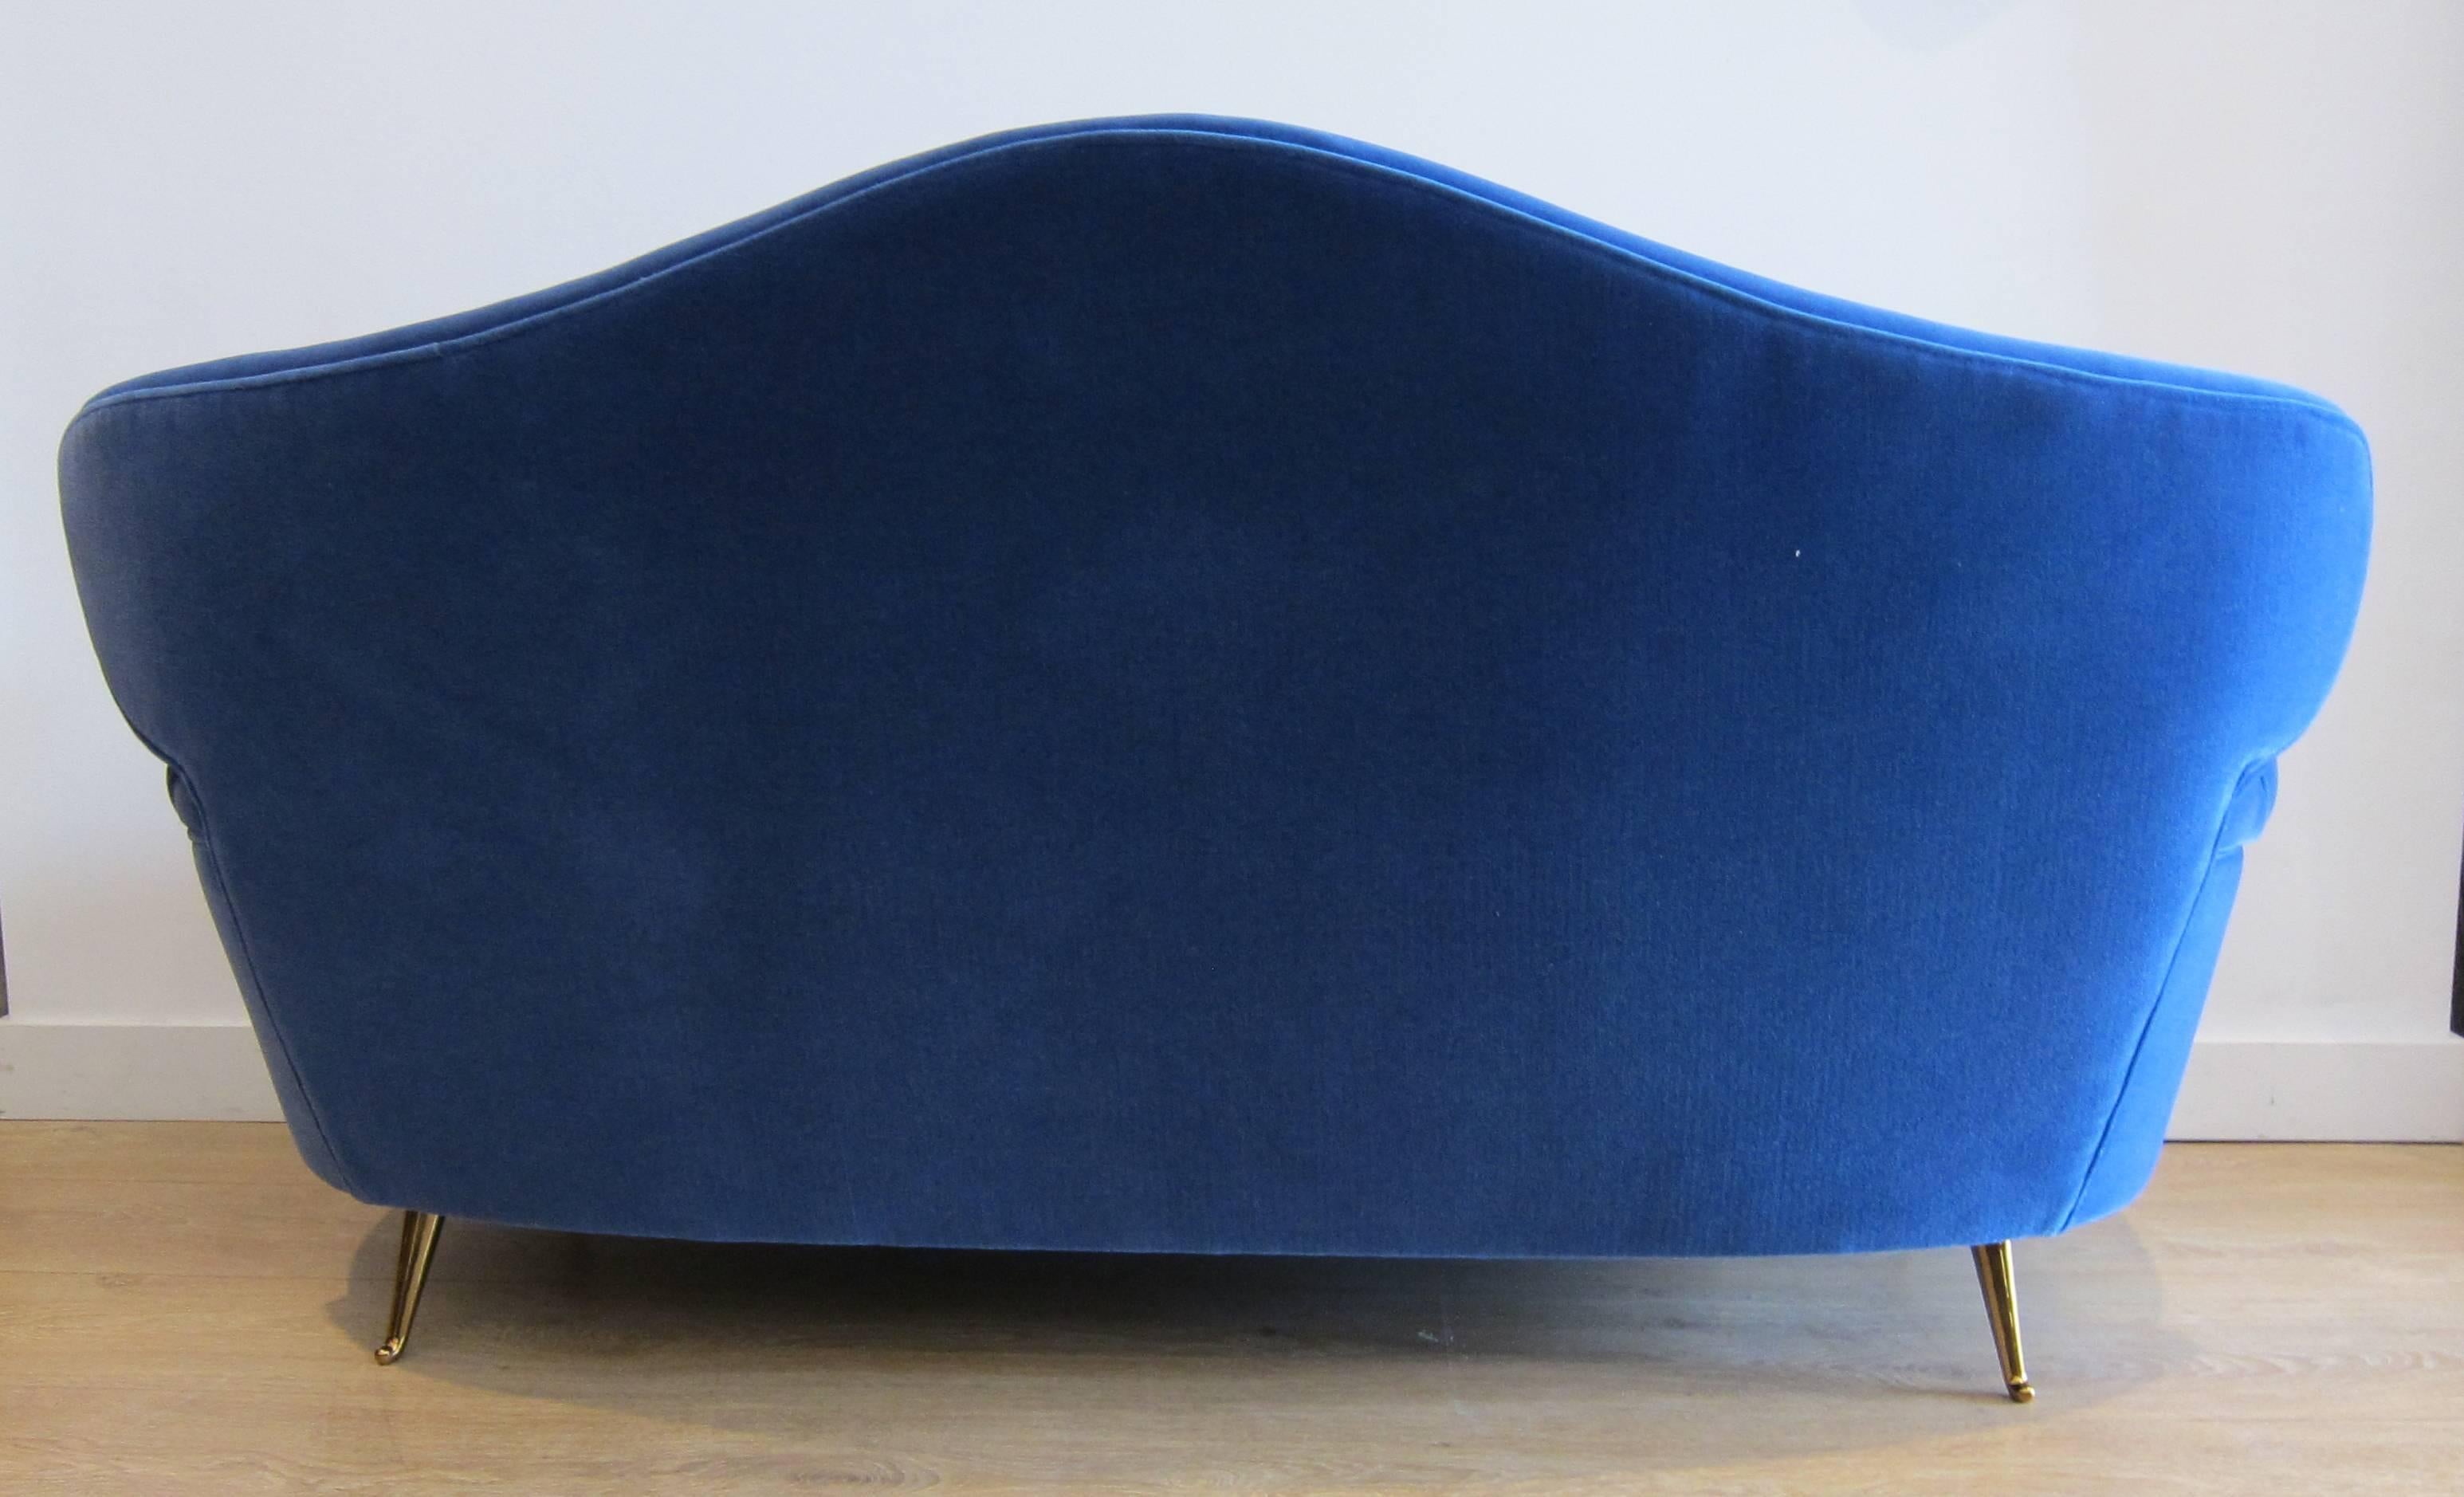 Amazing curvaceous Italian settee. Newly upholstered with blue mohair fabric. Elegant polished brass legs. Great lines.
Please see our listing for the matching pair of lounge chairs.
